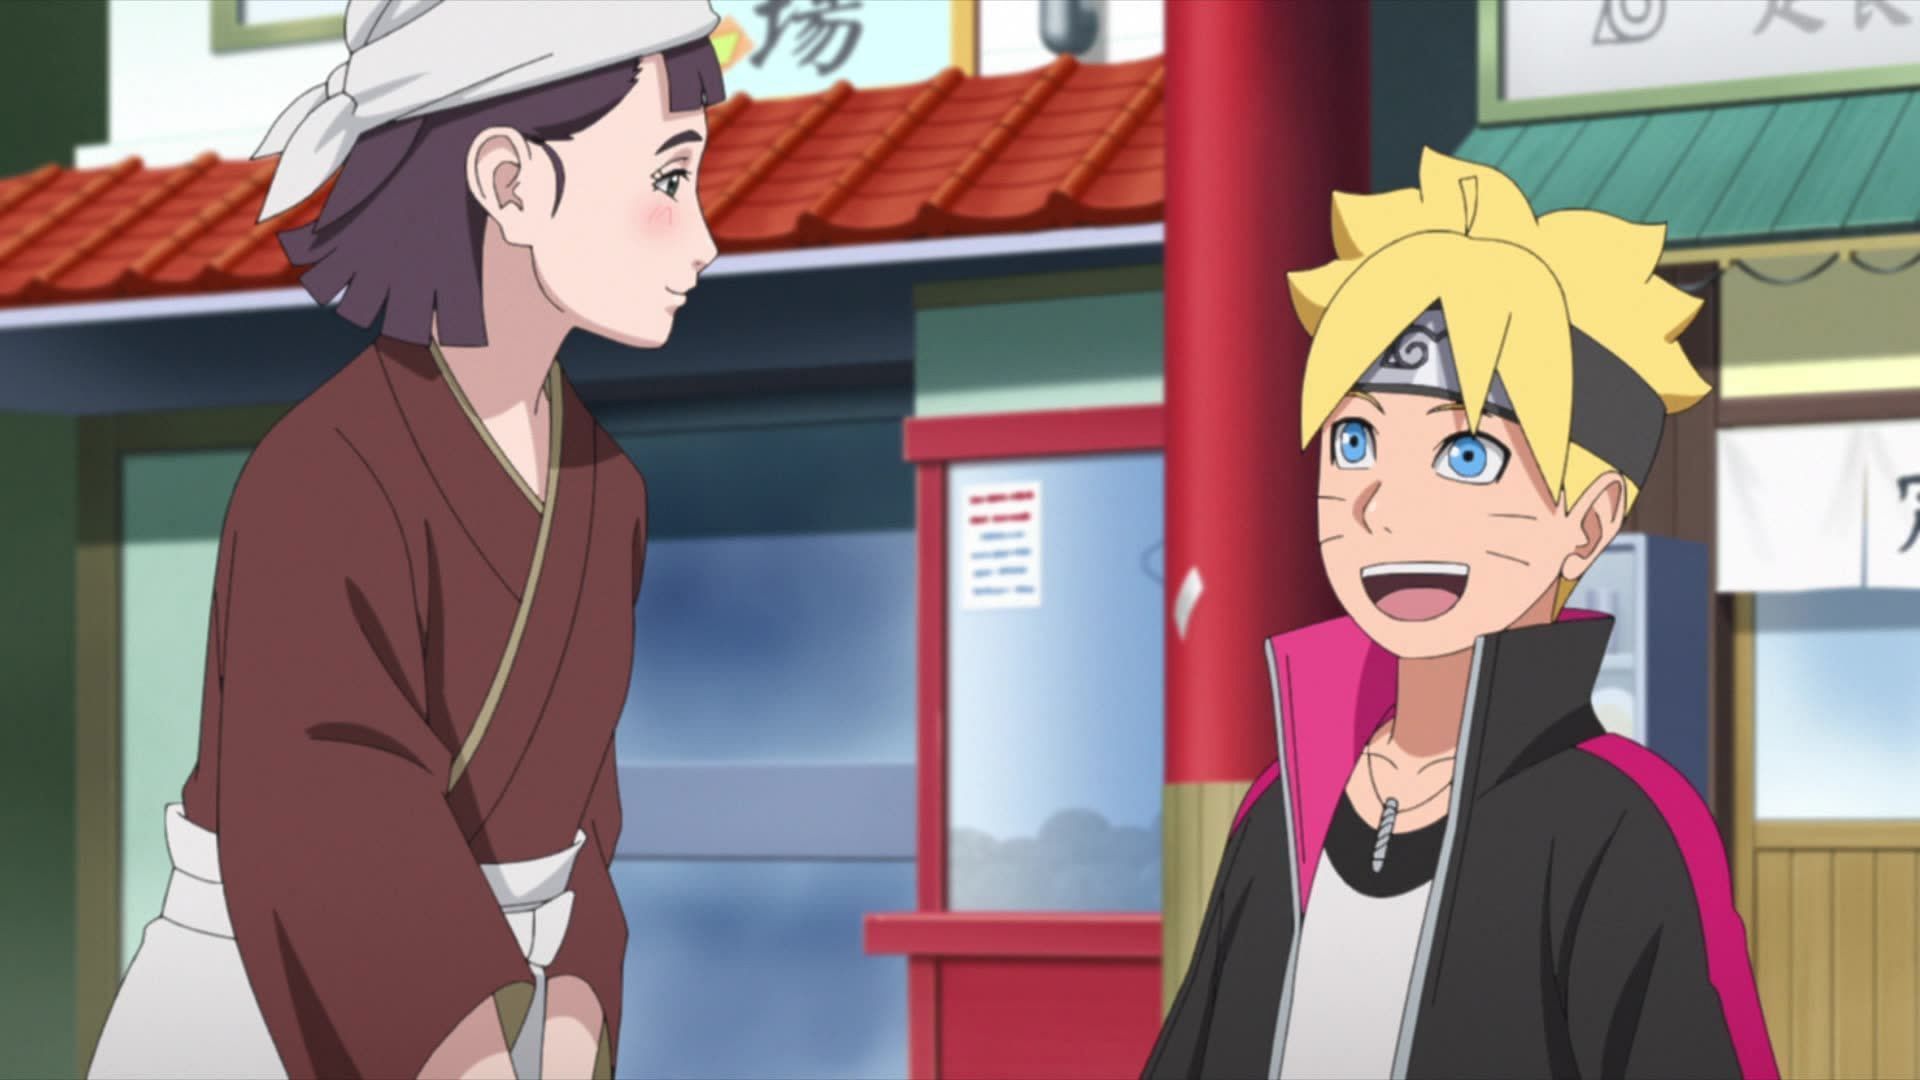 Kakashi and Boruto's team-up does not stop Fans' disappointment with Boruto  Episode 260